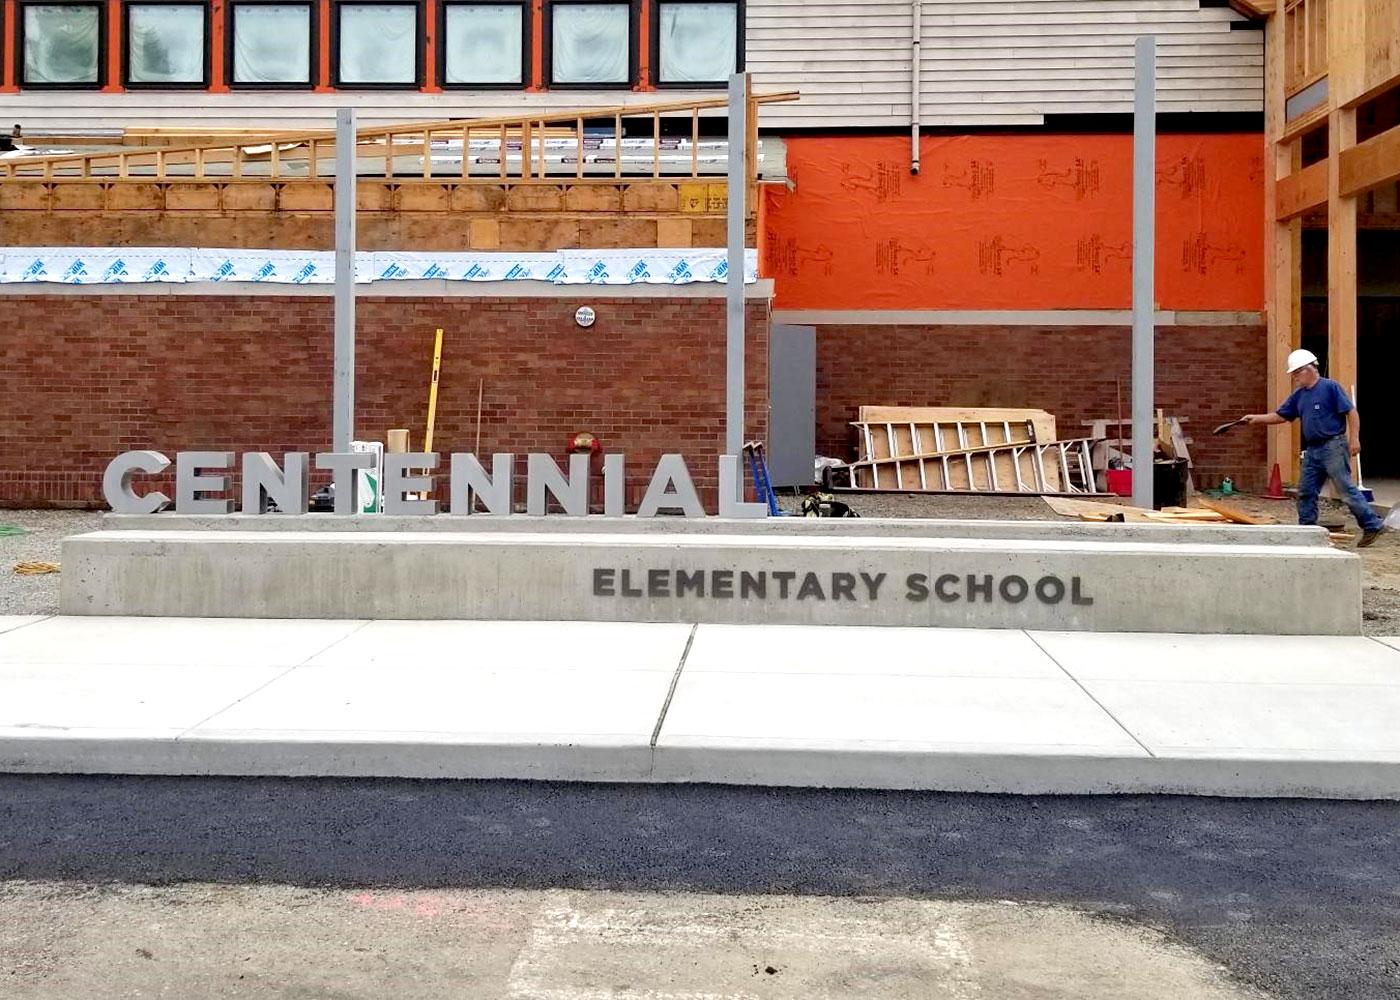 The exterior monument sign for Centennial features dimensional lettering in concrete.